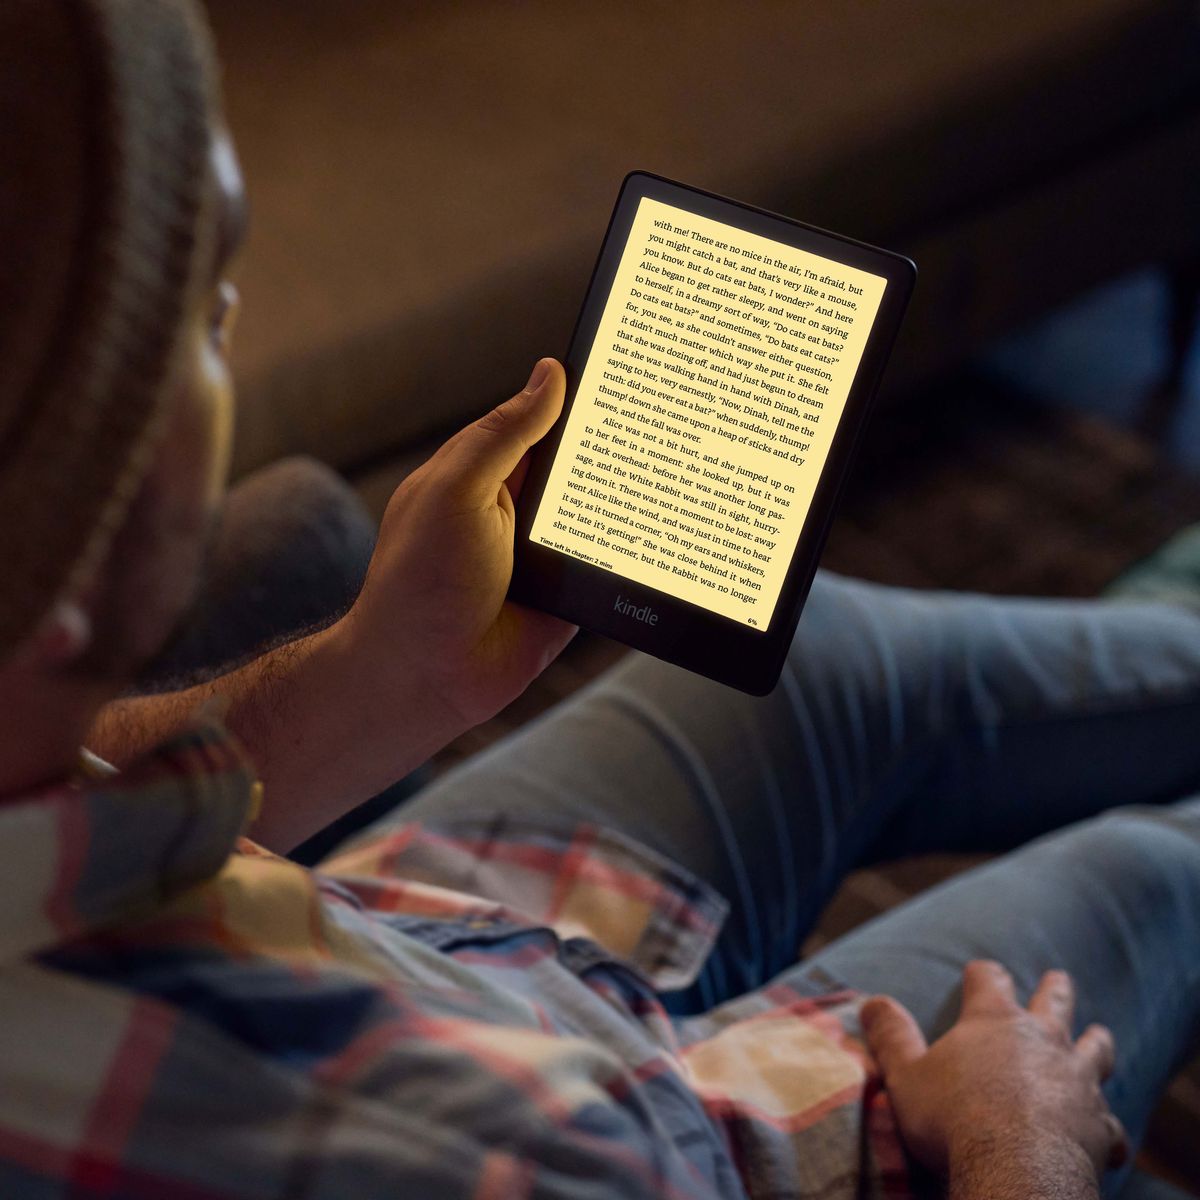 Kindle Unlimited and Kindle Ebooks: Understanding the Difference